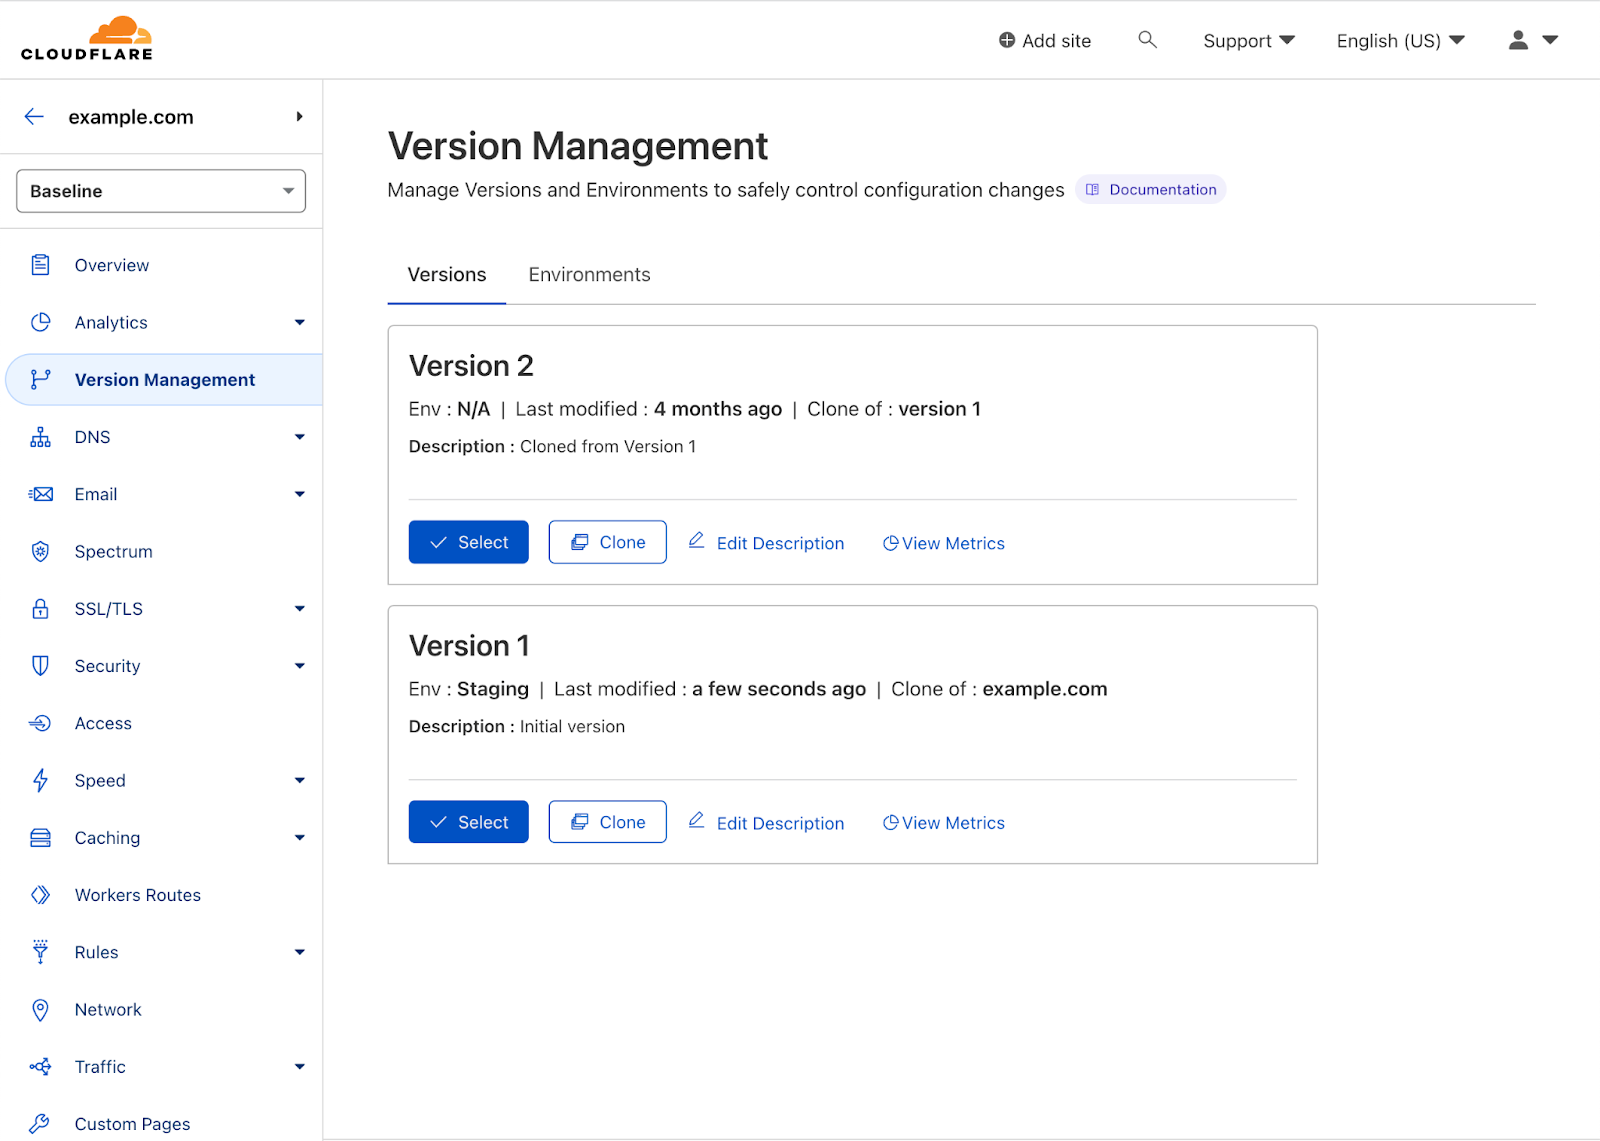 Version Management Screen in the Cloudflare dashboard showing 2 versions one of which is deployed to the Staging environment.